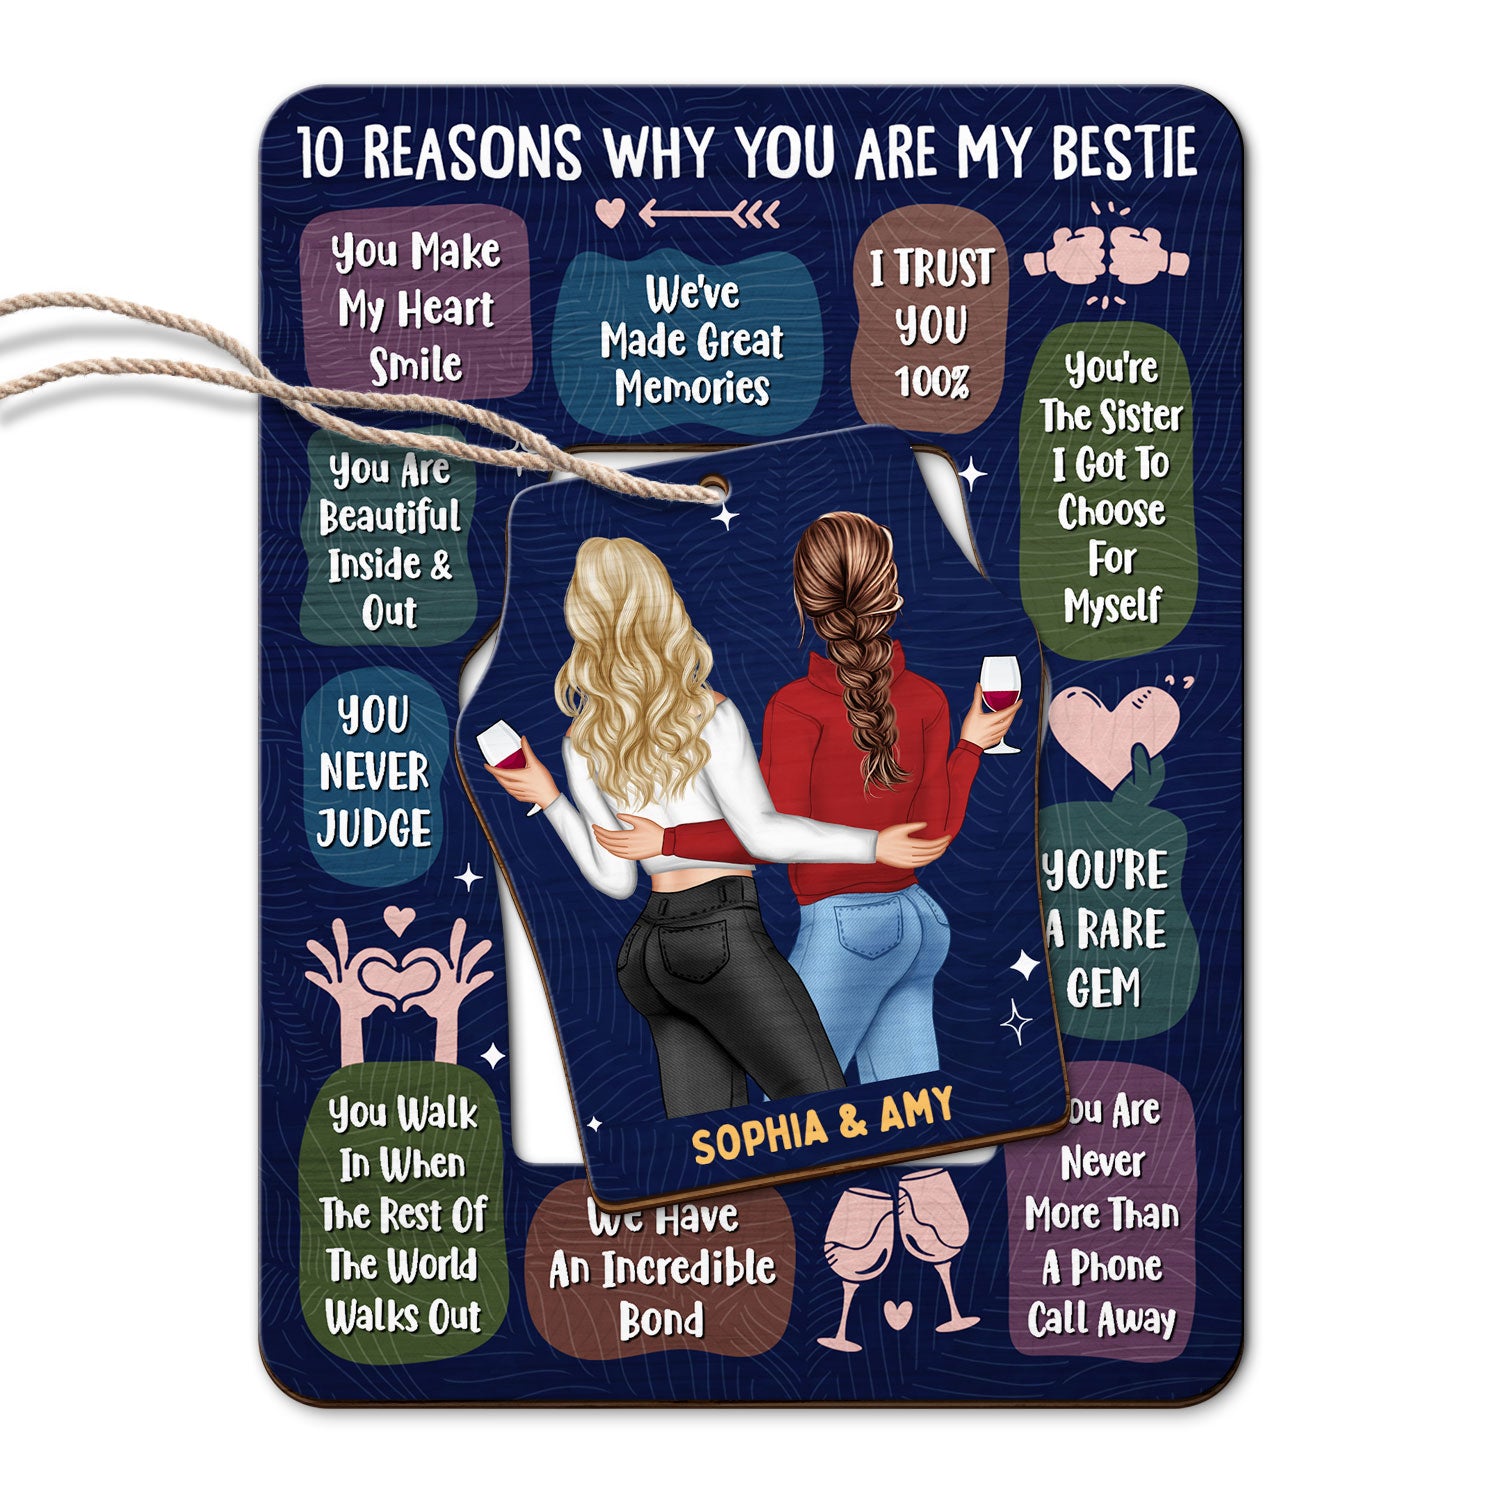 10 Reasons Why You Are My Bestie - Holiday, Birthday, Loving Gift For Friends, Colleagues - Personalized Wooden Card With Pop Out Ornament